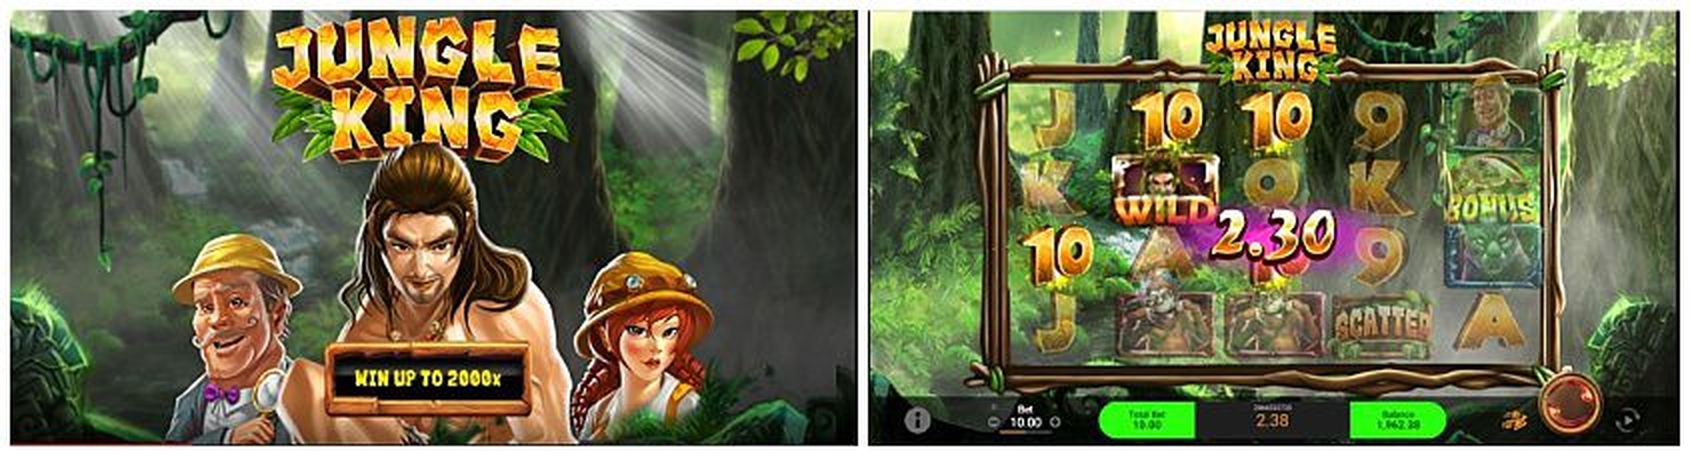 The Jungle King Online Slot Demo Game by Wager Gaming